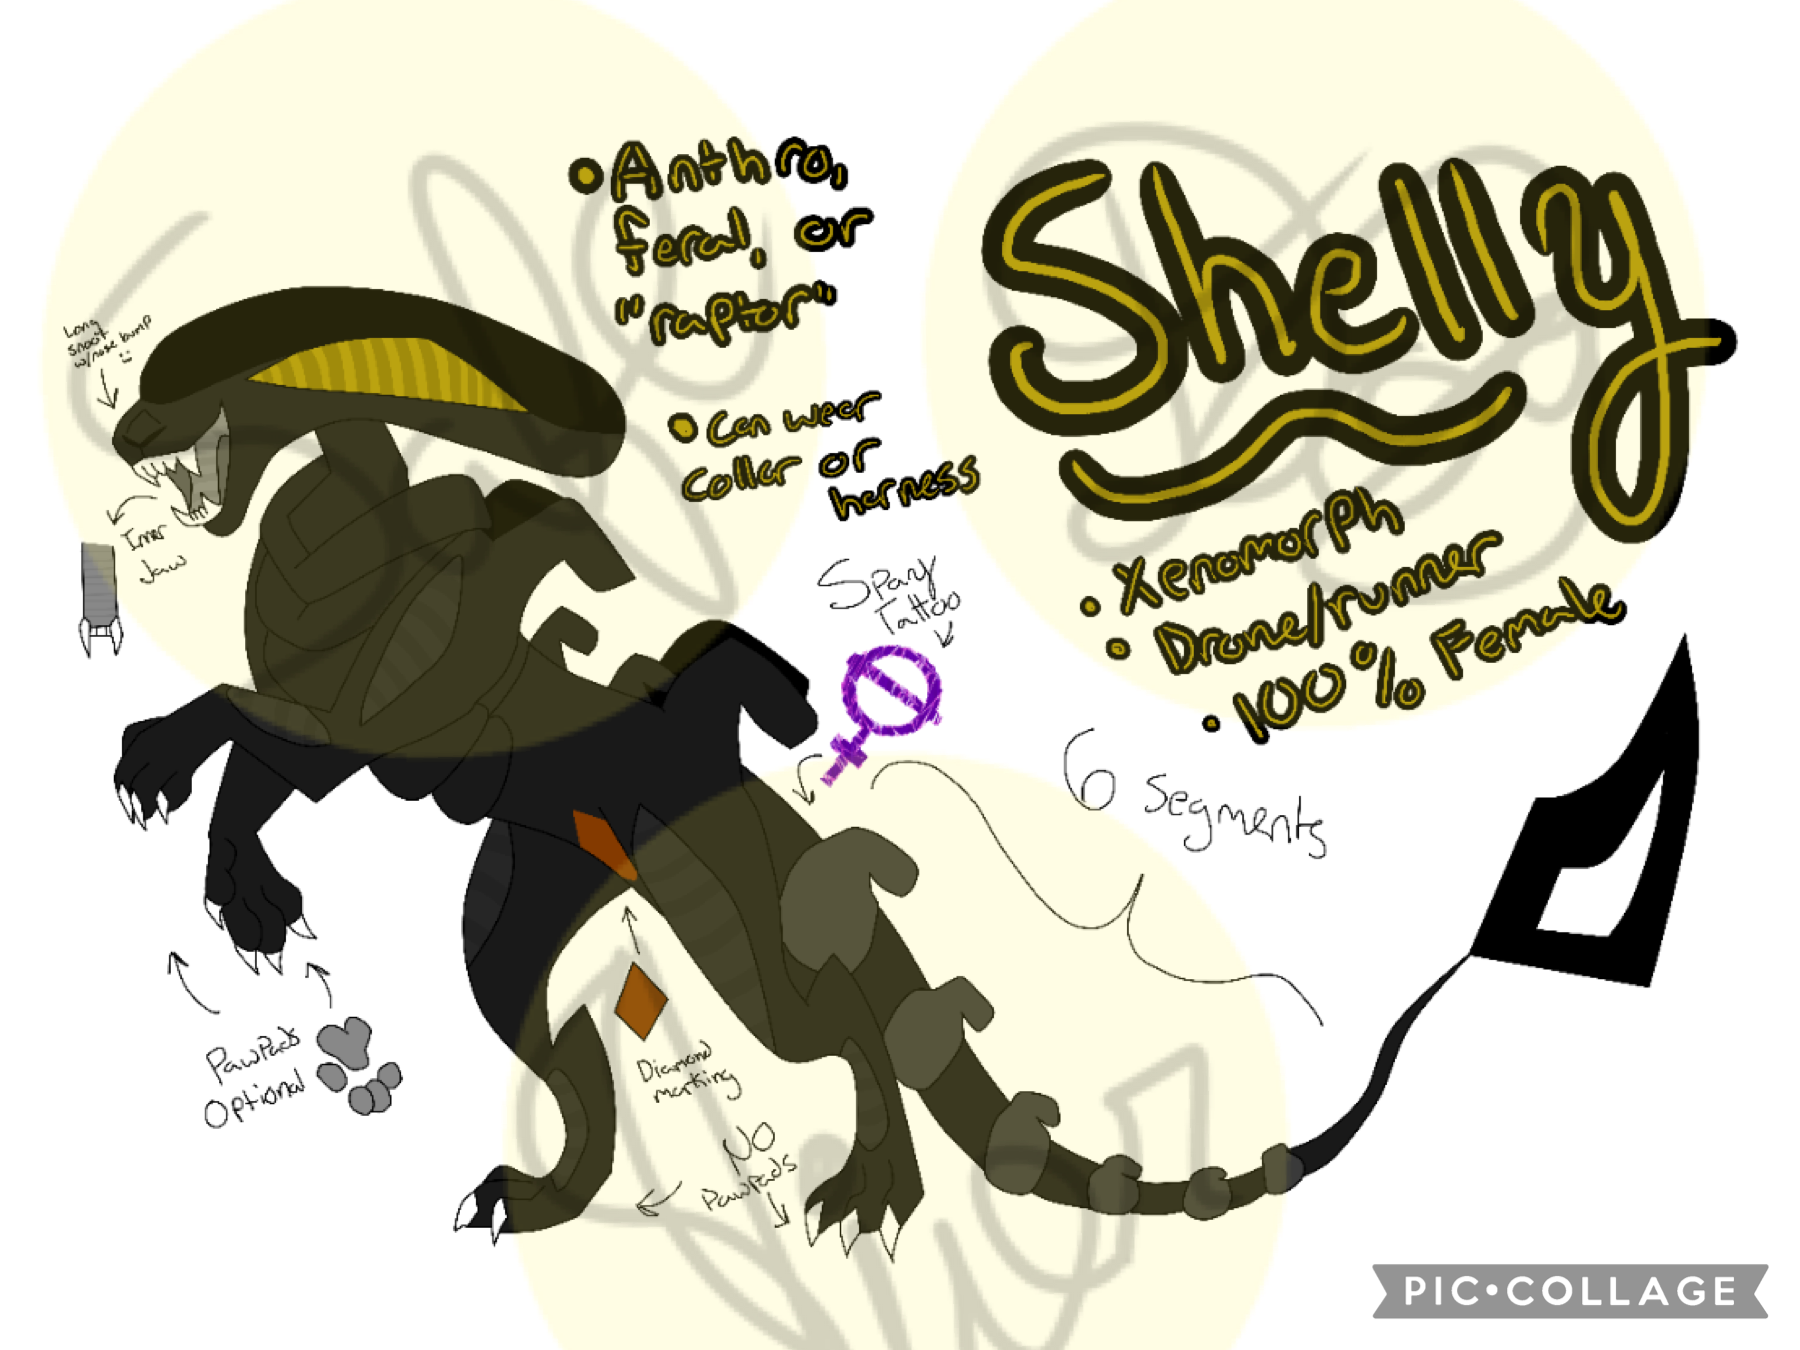 SHELLY’S OFFICIAL REF! 

Aaaaaa I’ve been getting into Alien stuff again and I bought a few comics and it’s rad- 